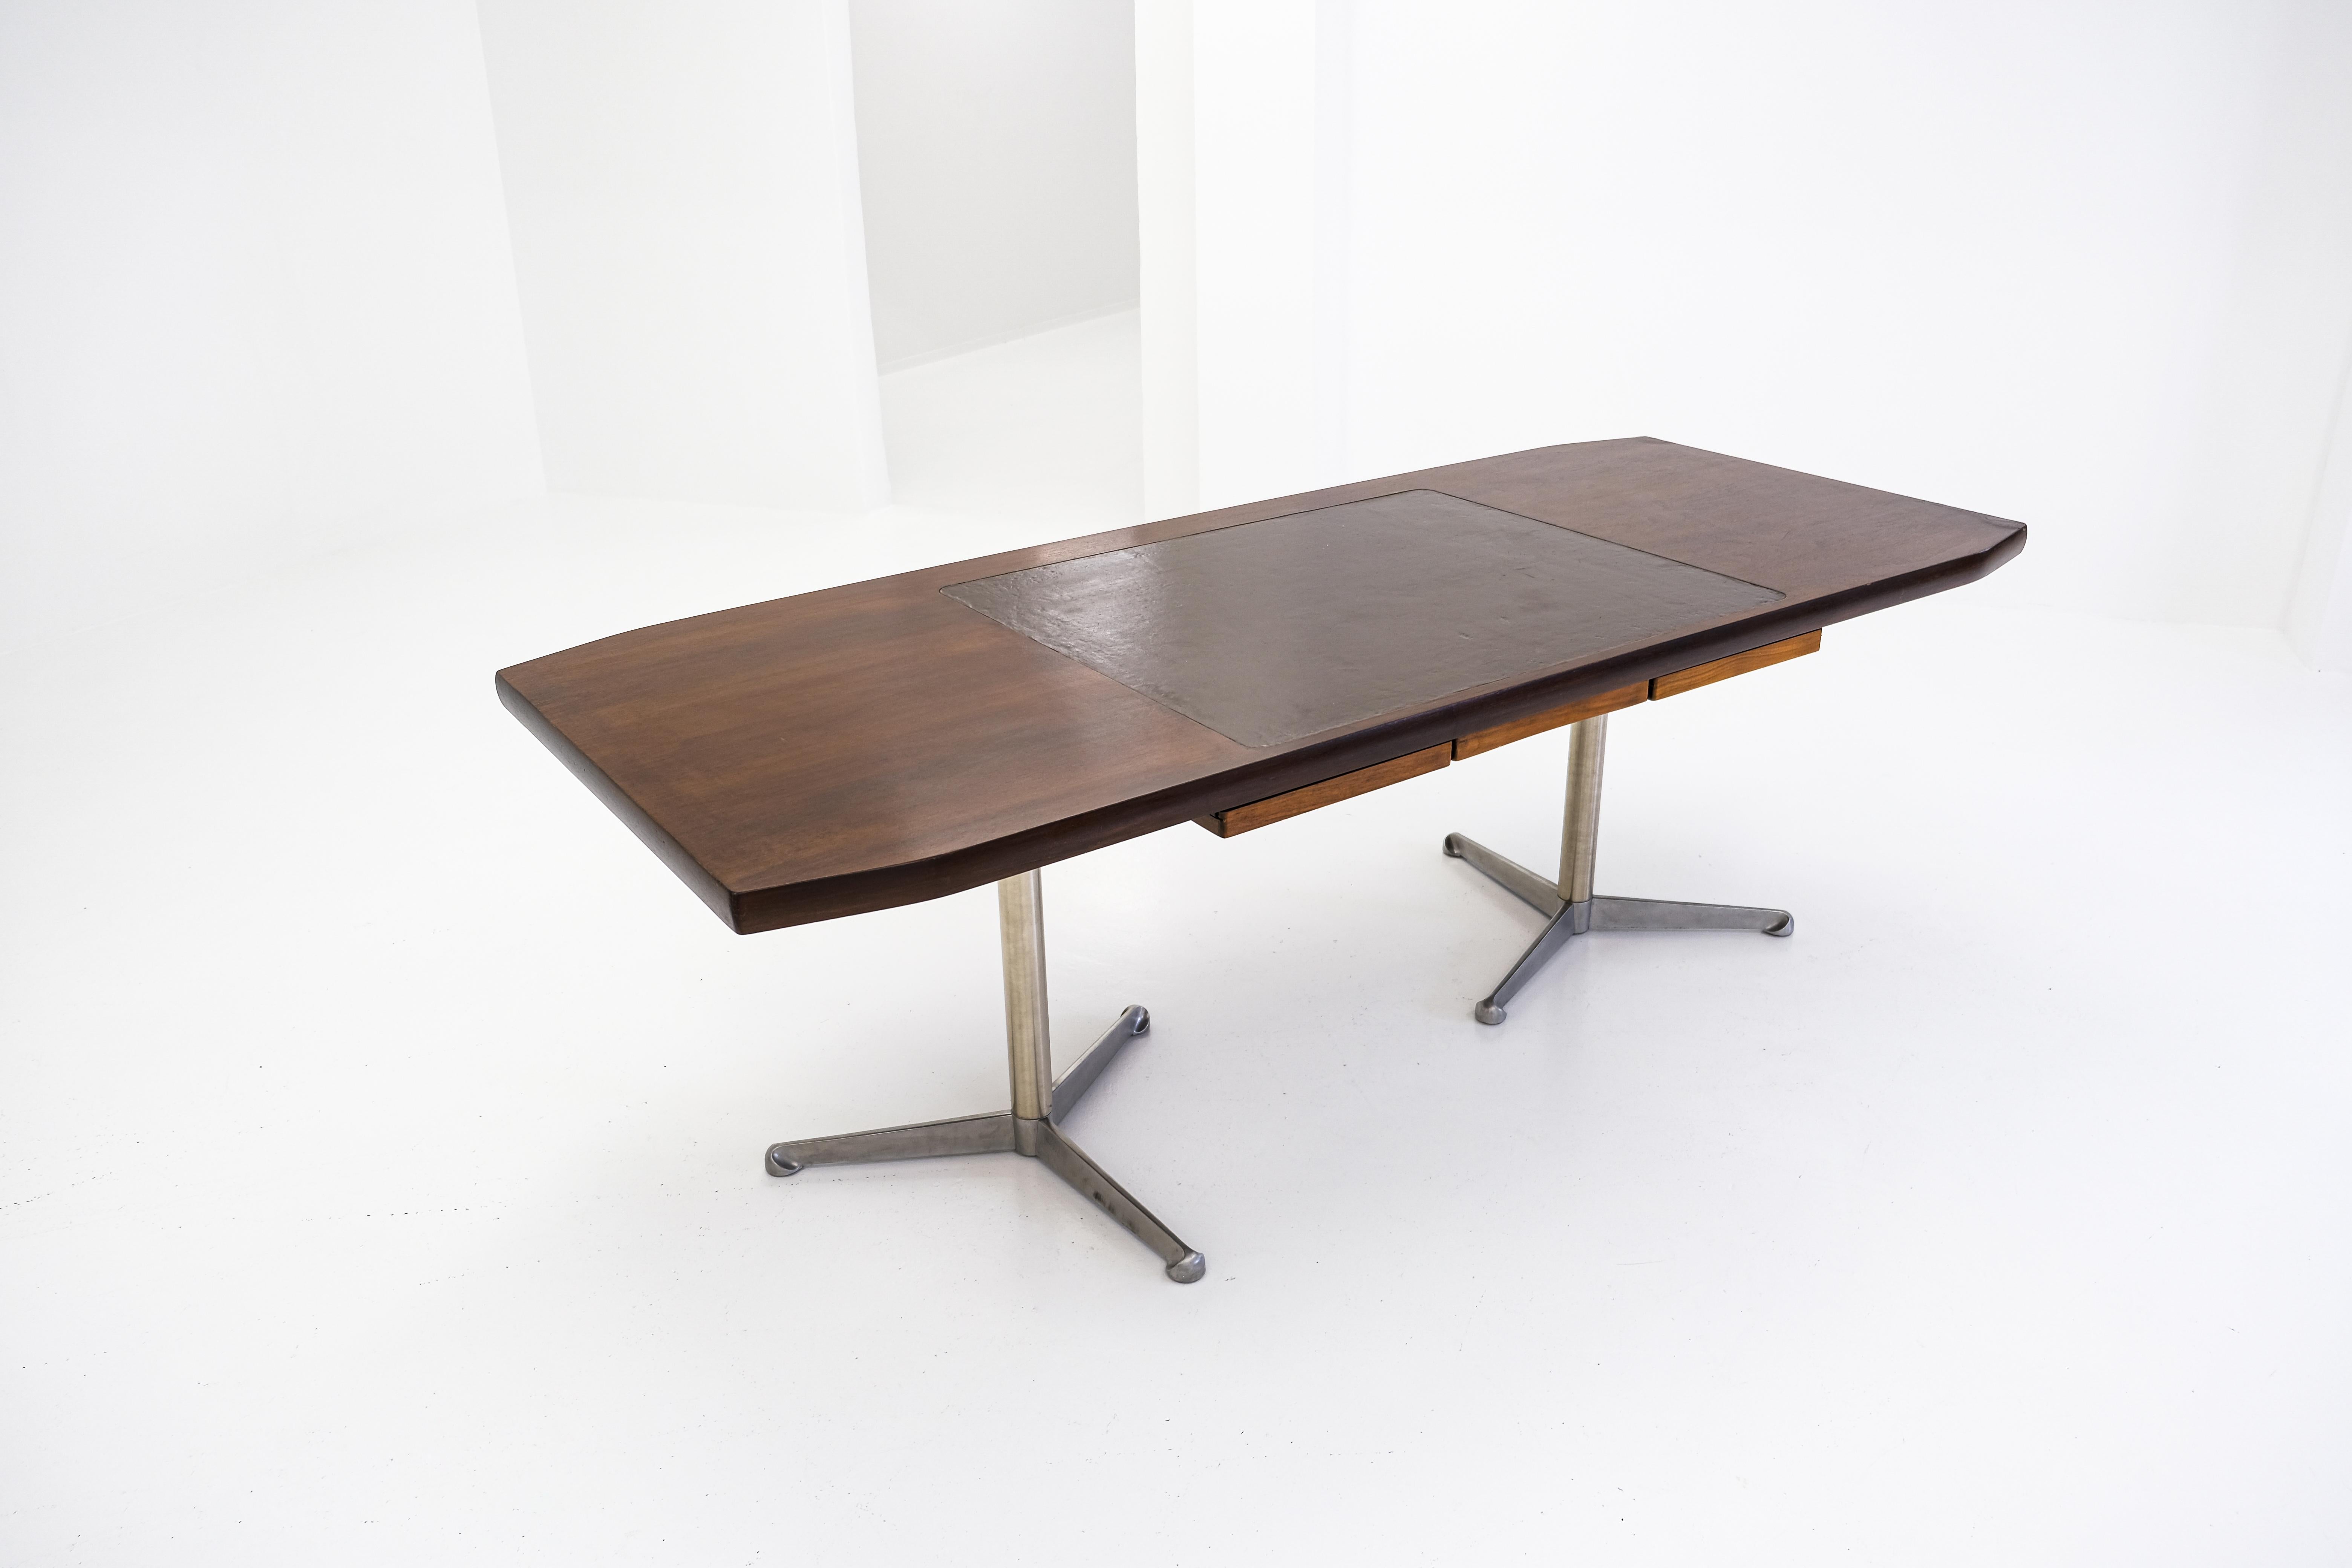 Stunning large desk or writing table designed by Osvaldo Borsani and manufactured by Tecno, Italy 1954. The table has aluminium tripod legs for stability and the top is made of walnut veneer with a brown leather inlay with a beautiful patina from